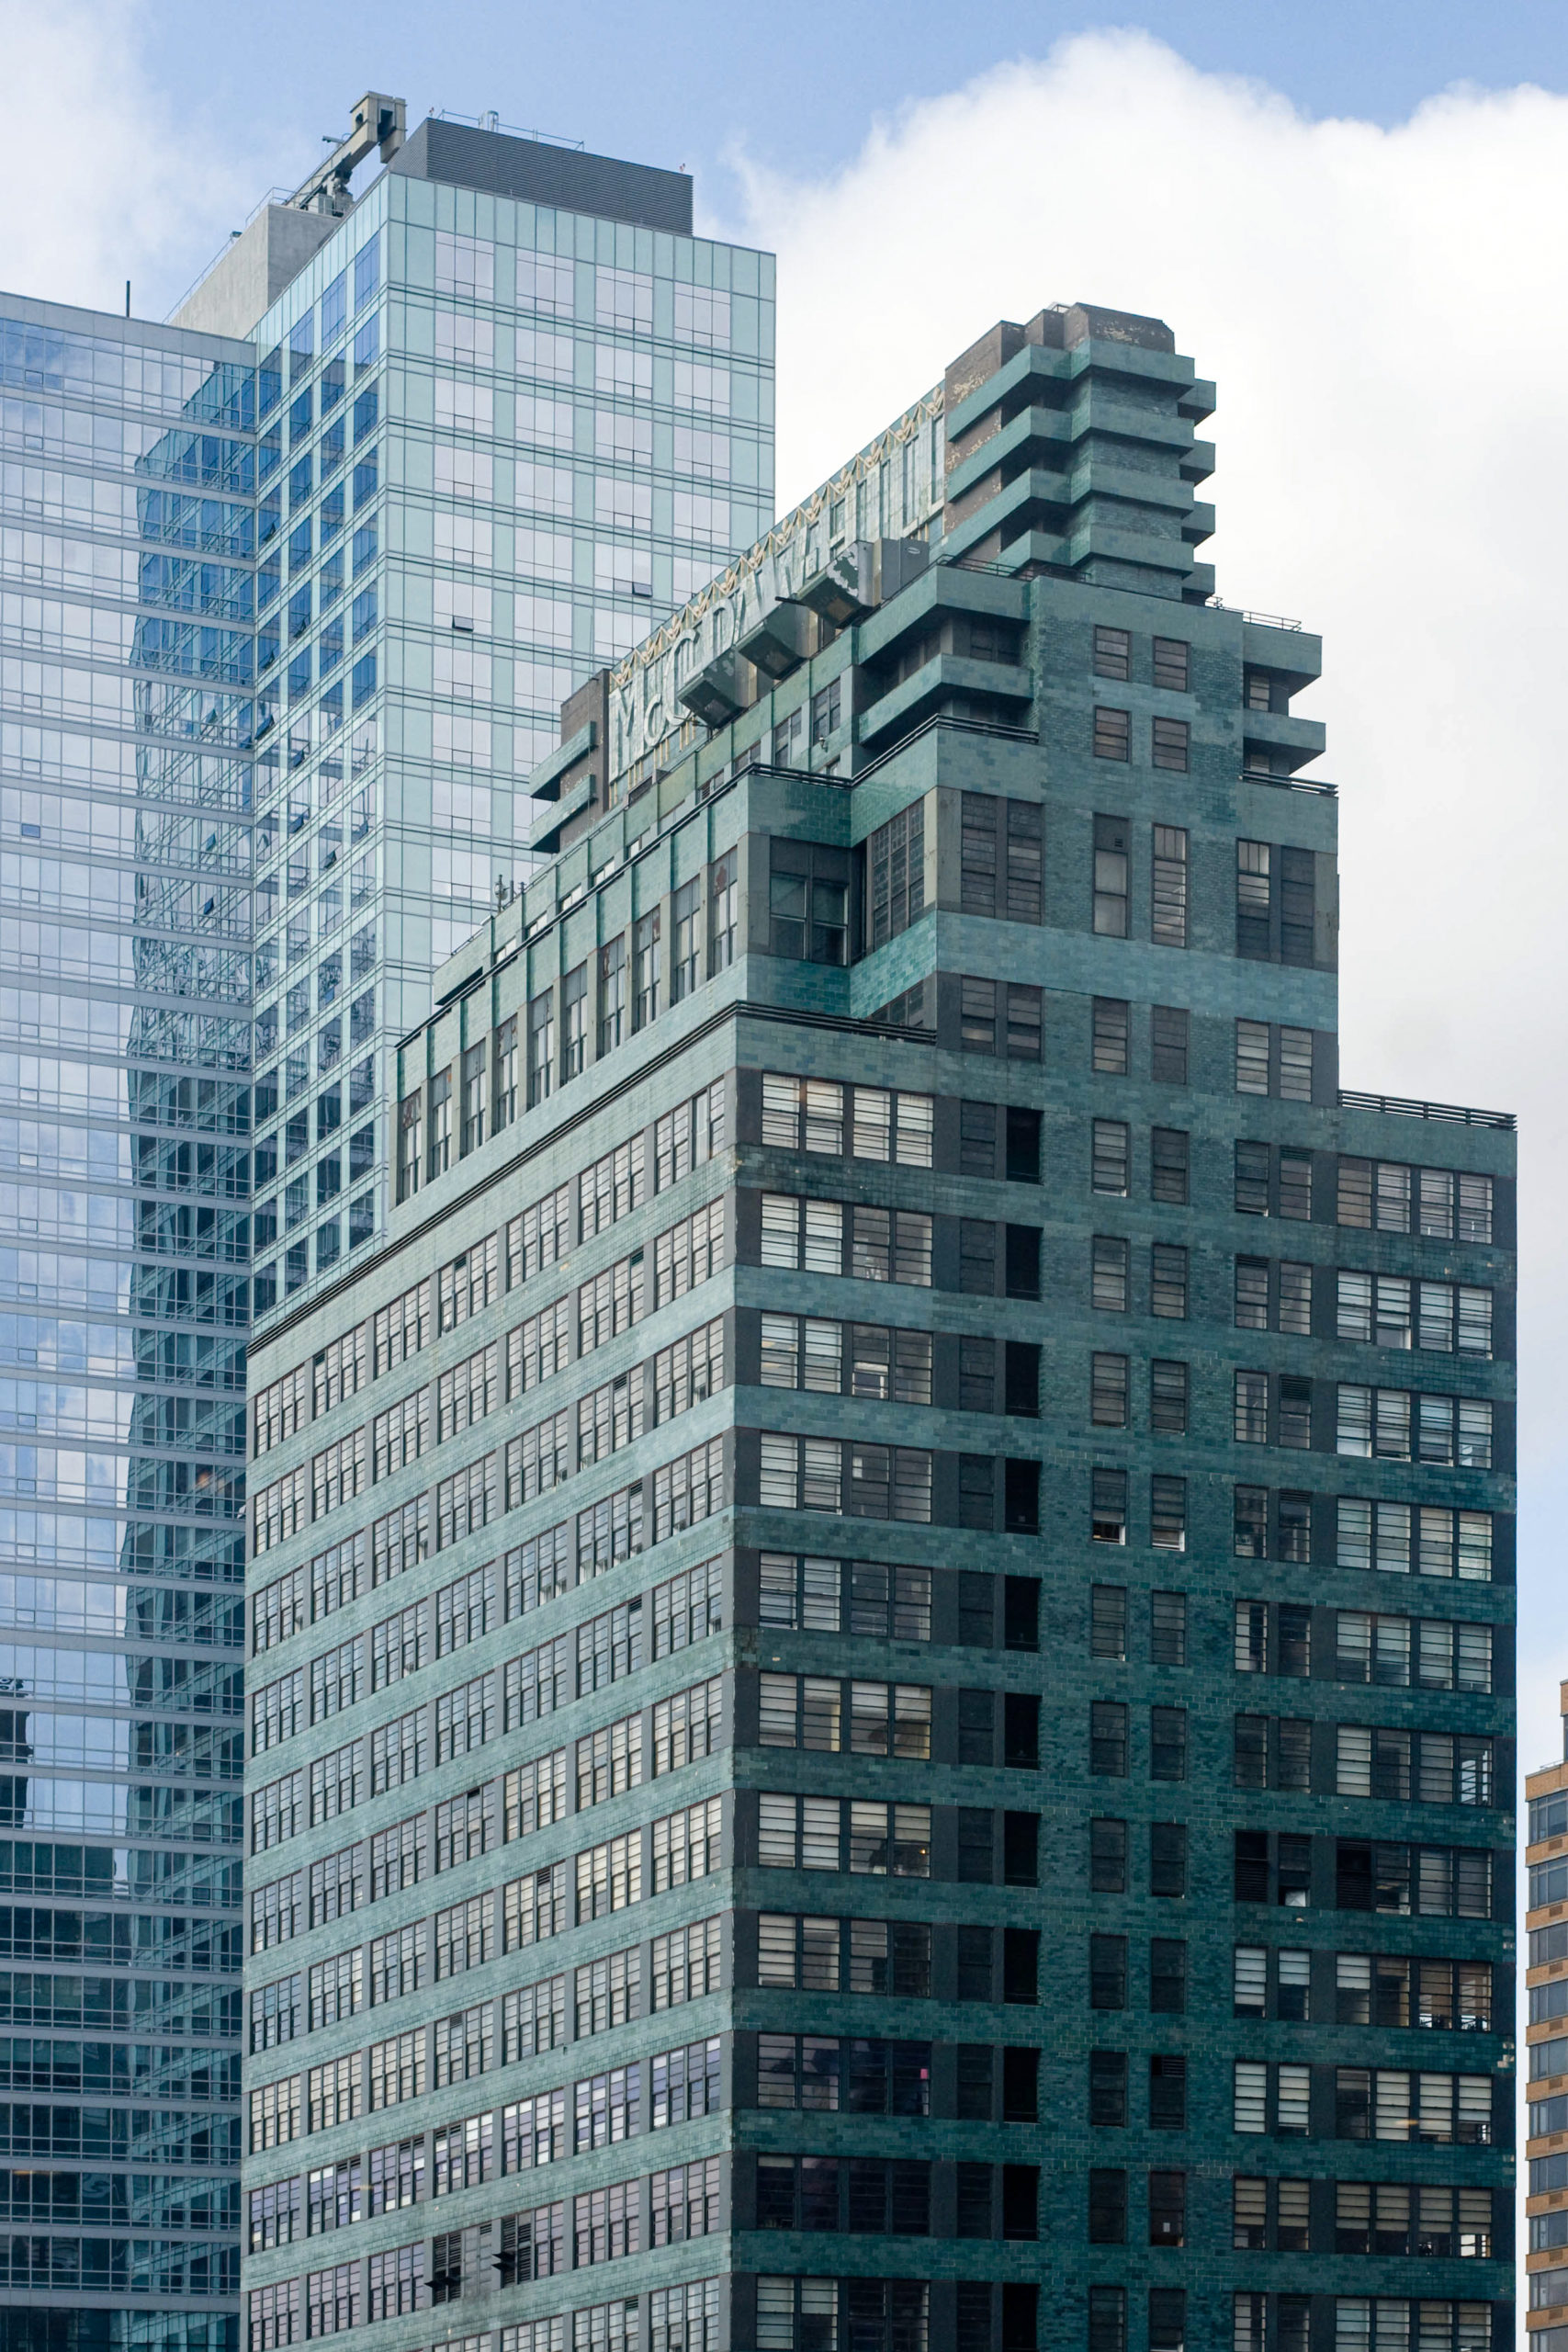 architectural ceramics McGraw-Hill Building by Jablonski Building Conservation, Inc., New York, NY, United States